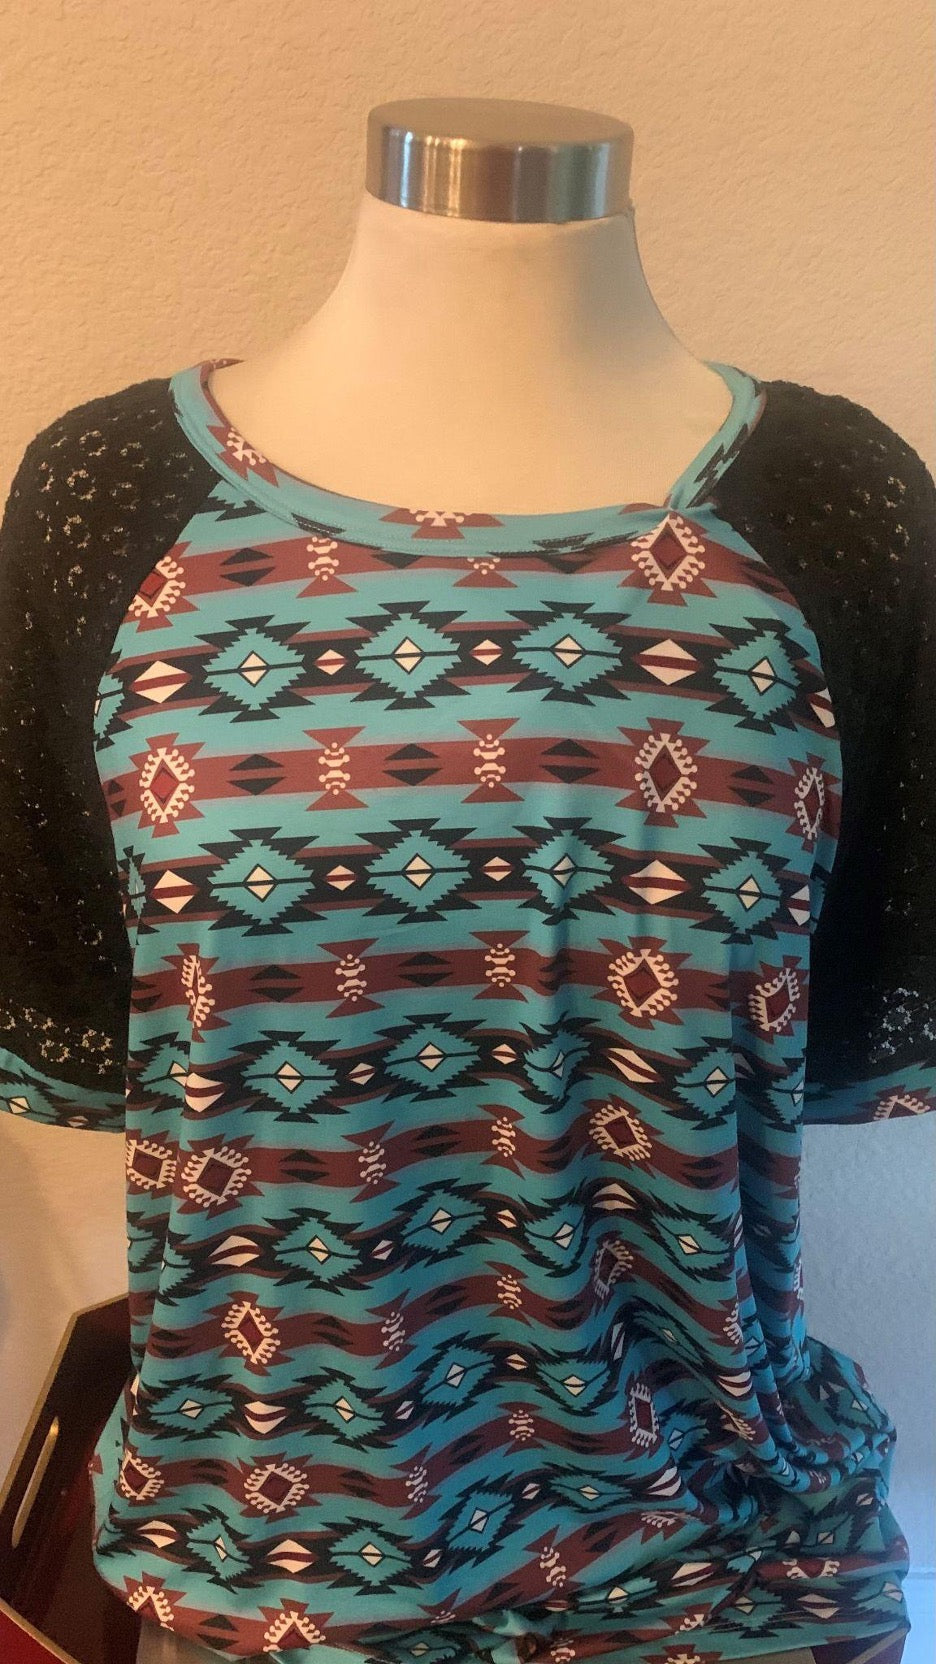 Blue Aztec Lacy Sleeve Shirt - Cowtown Bling N Things